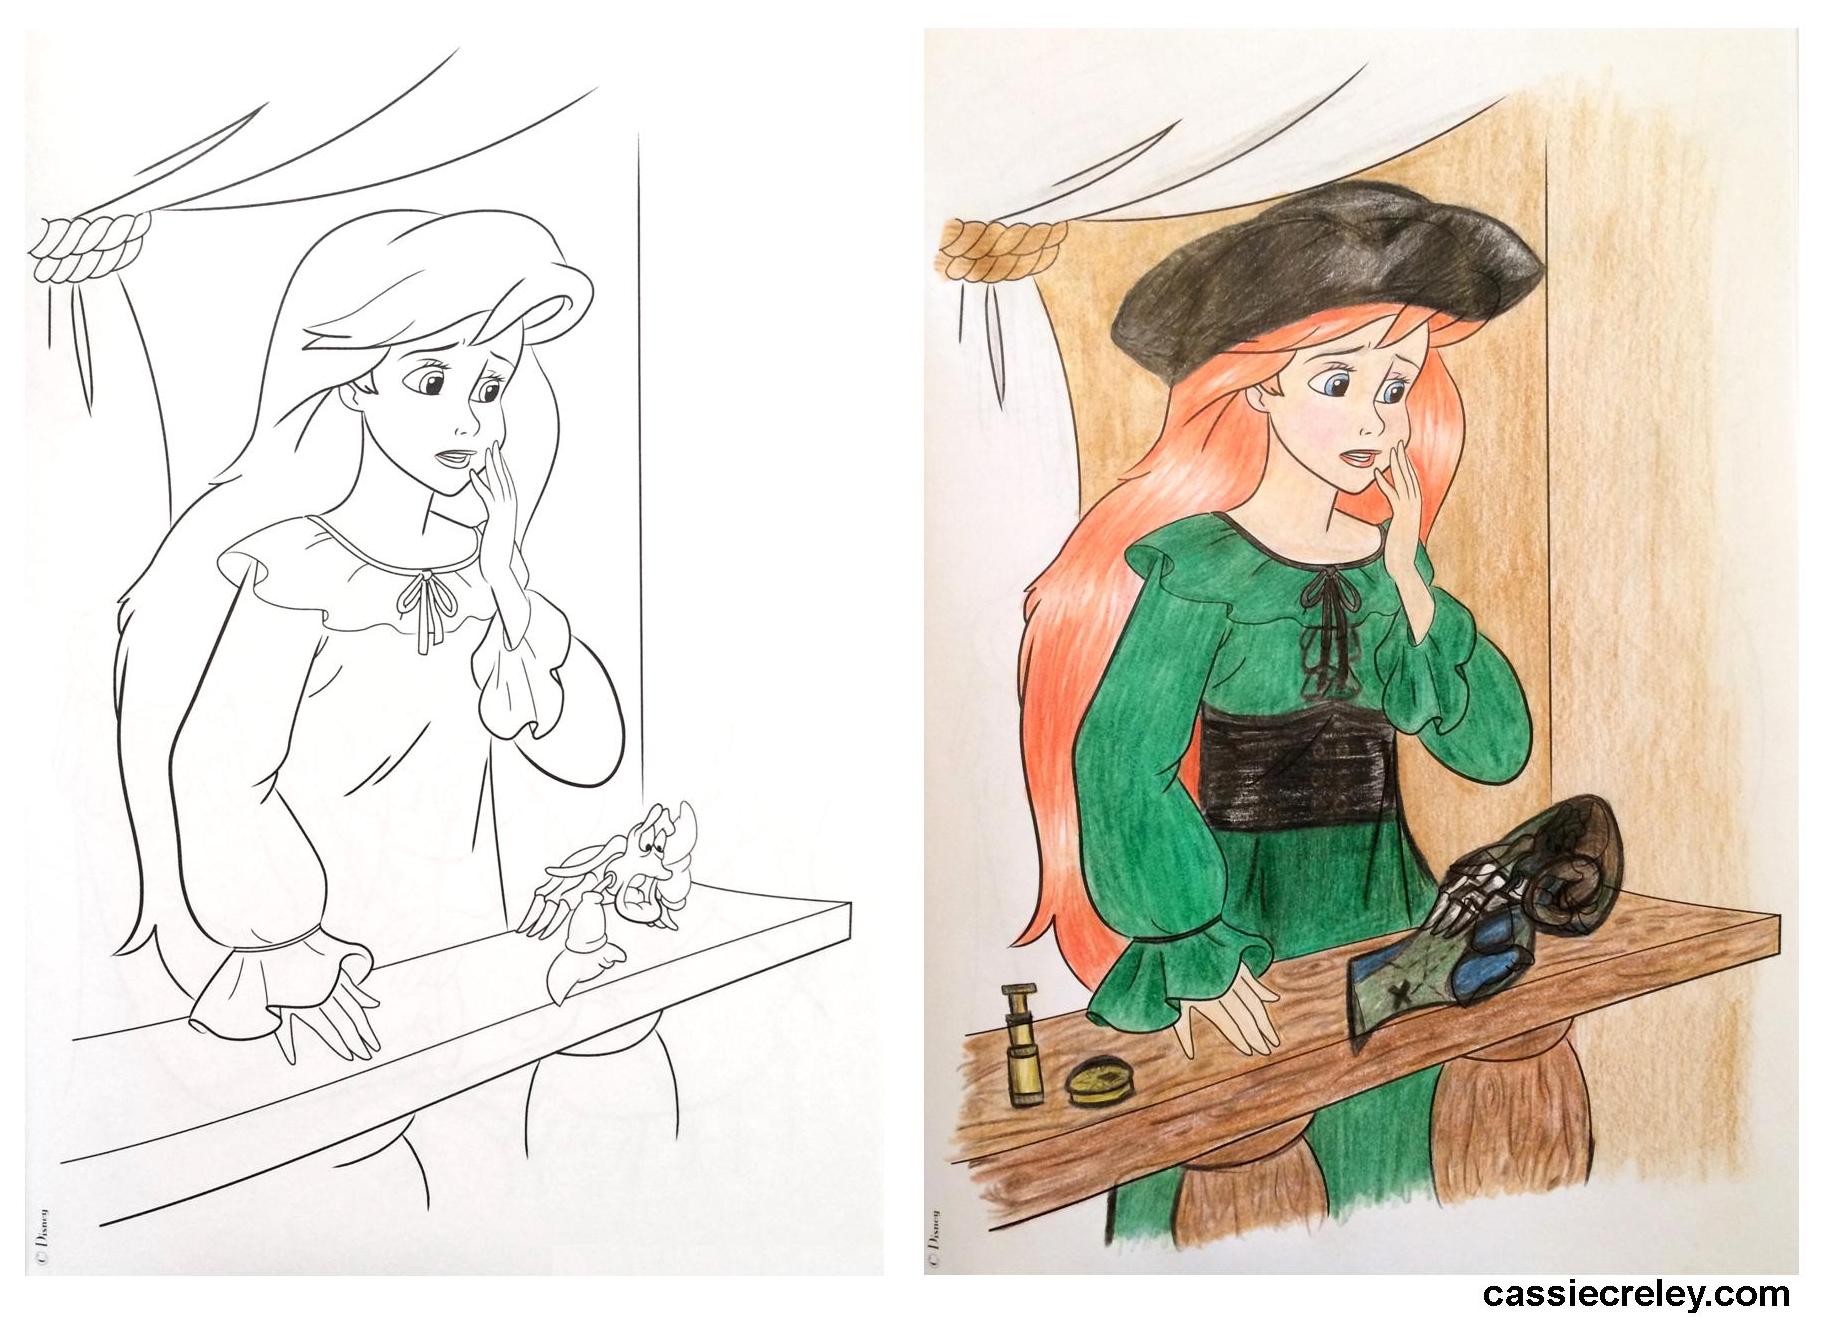 Ariel as a Pirate, Altered Coloring Book Art #4: I’m given The Little Mermaid a makeover. A coloring idea for stress relief and sparking creativity. Reimagined Coloring Pages with Disney princesses. |  cassiecreley.com